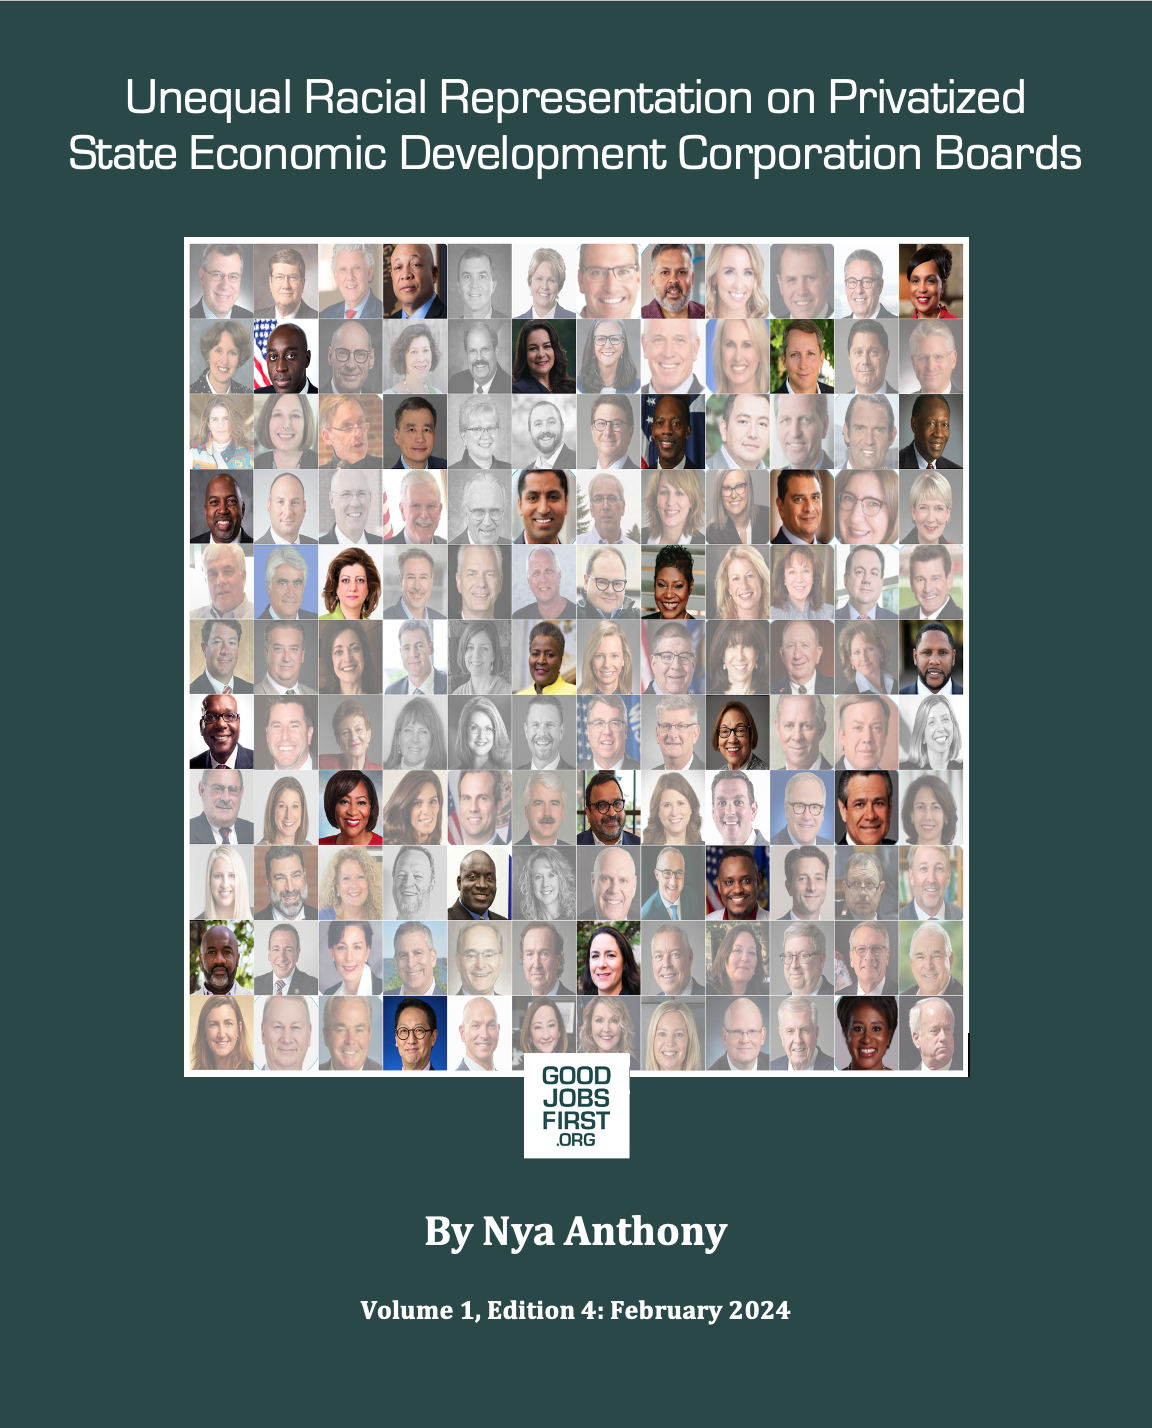 140 board seats on nine privatized state economic development corporations, just 27 are held by people of color.